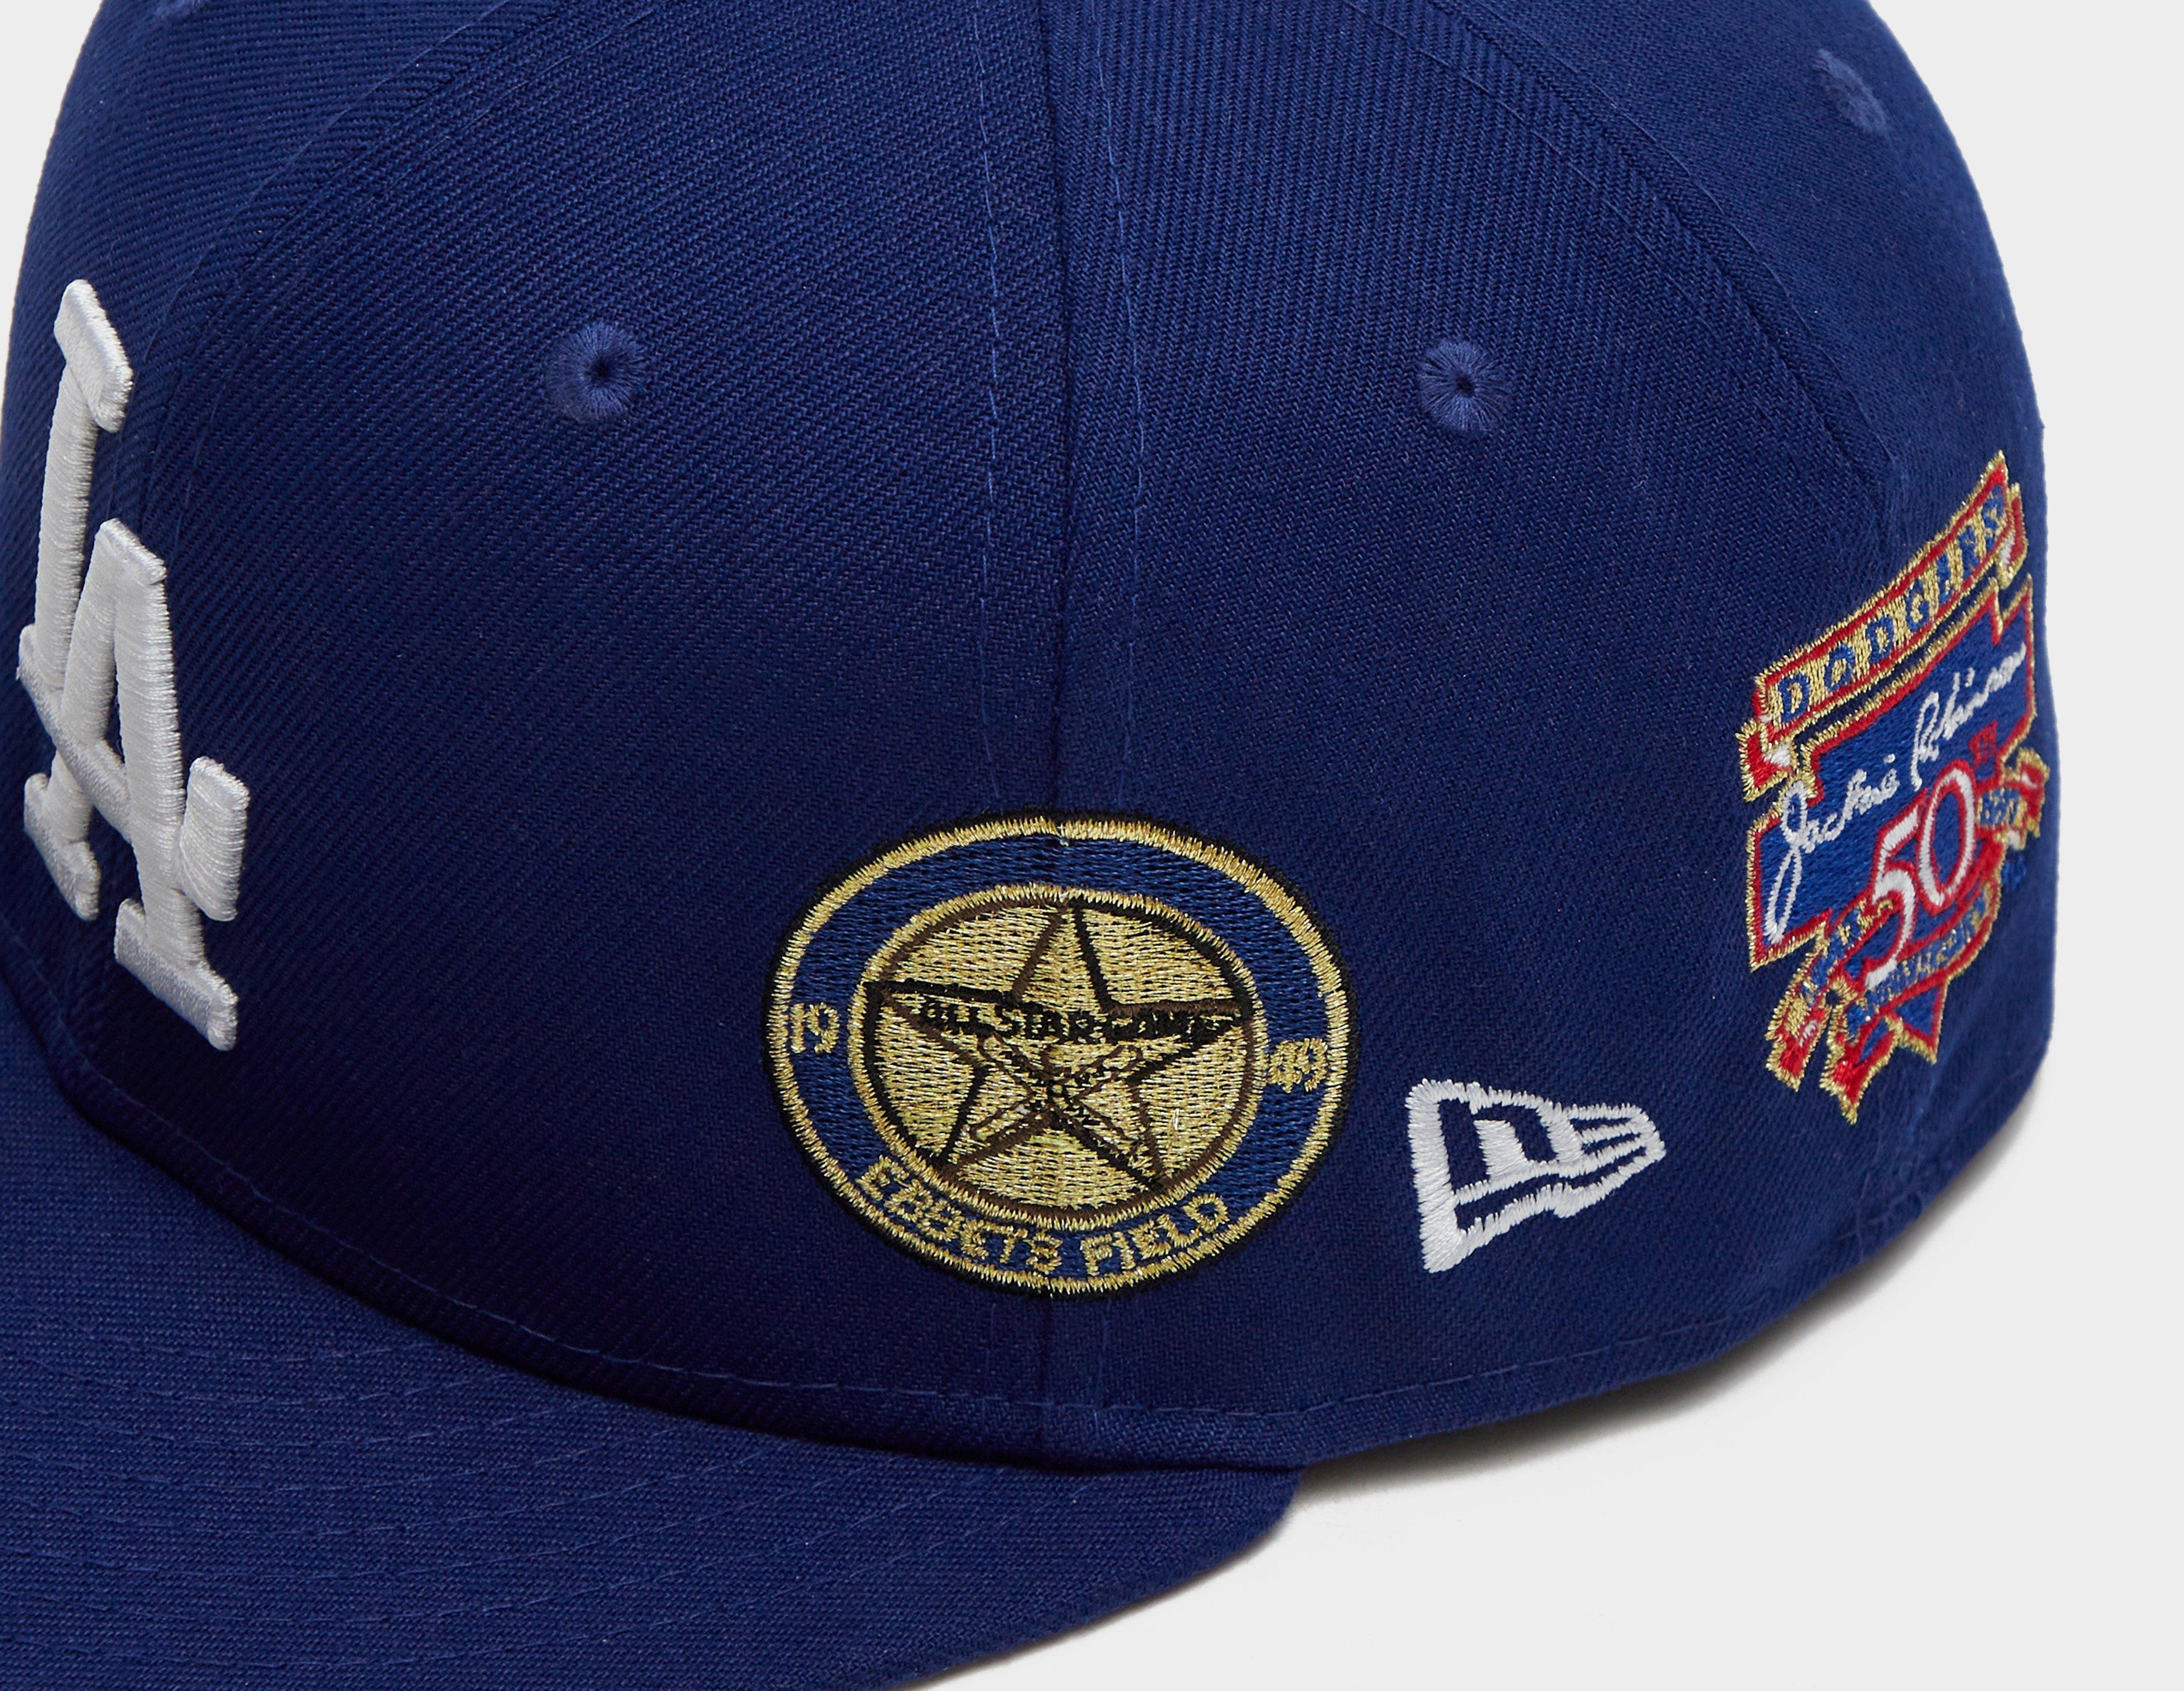 New Era Atlanta Braves All Star Game History Patch Hat Club Exclusive  59Fifty Fitted Hat Navy/Red Men's - US